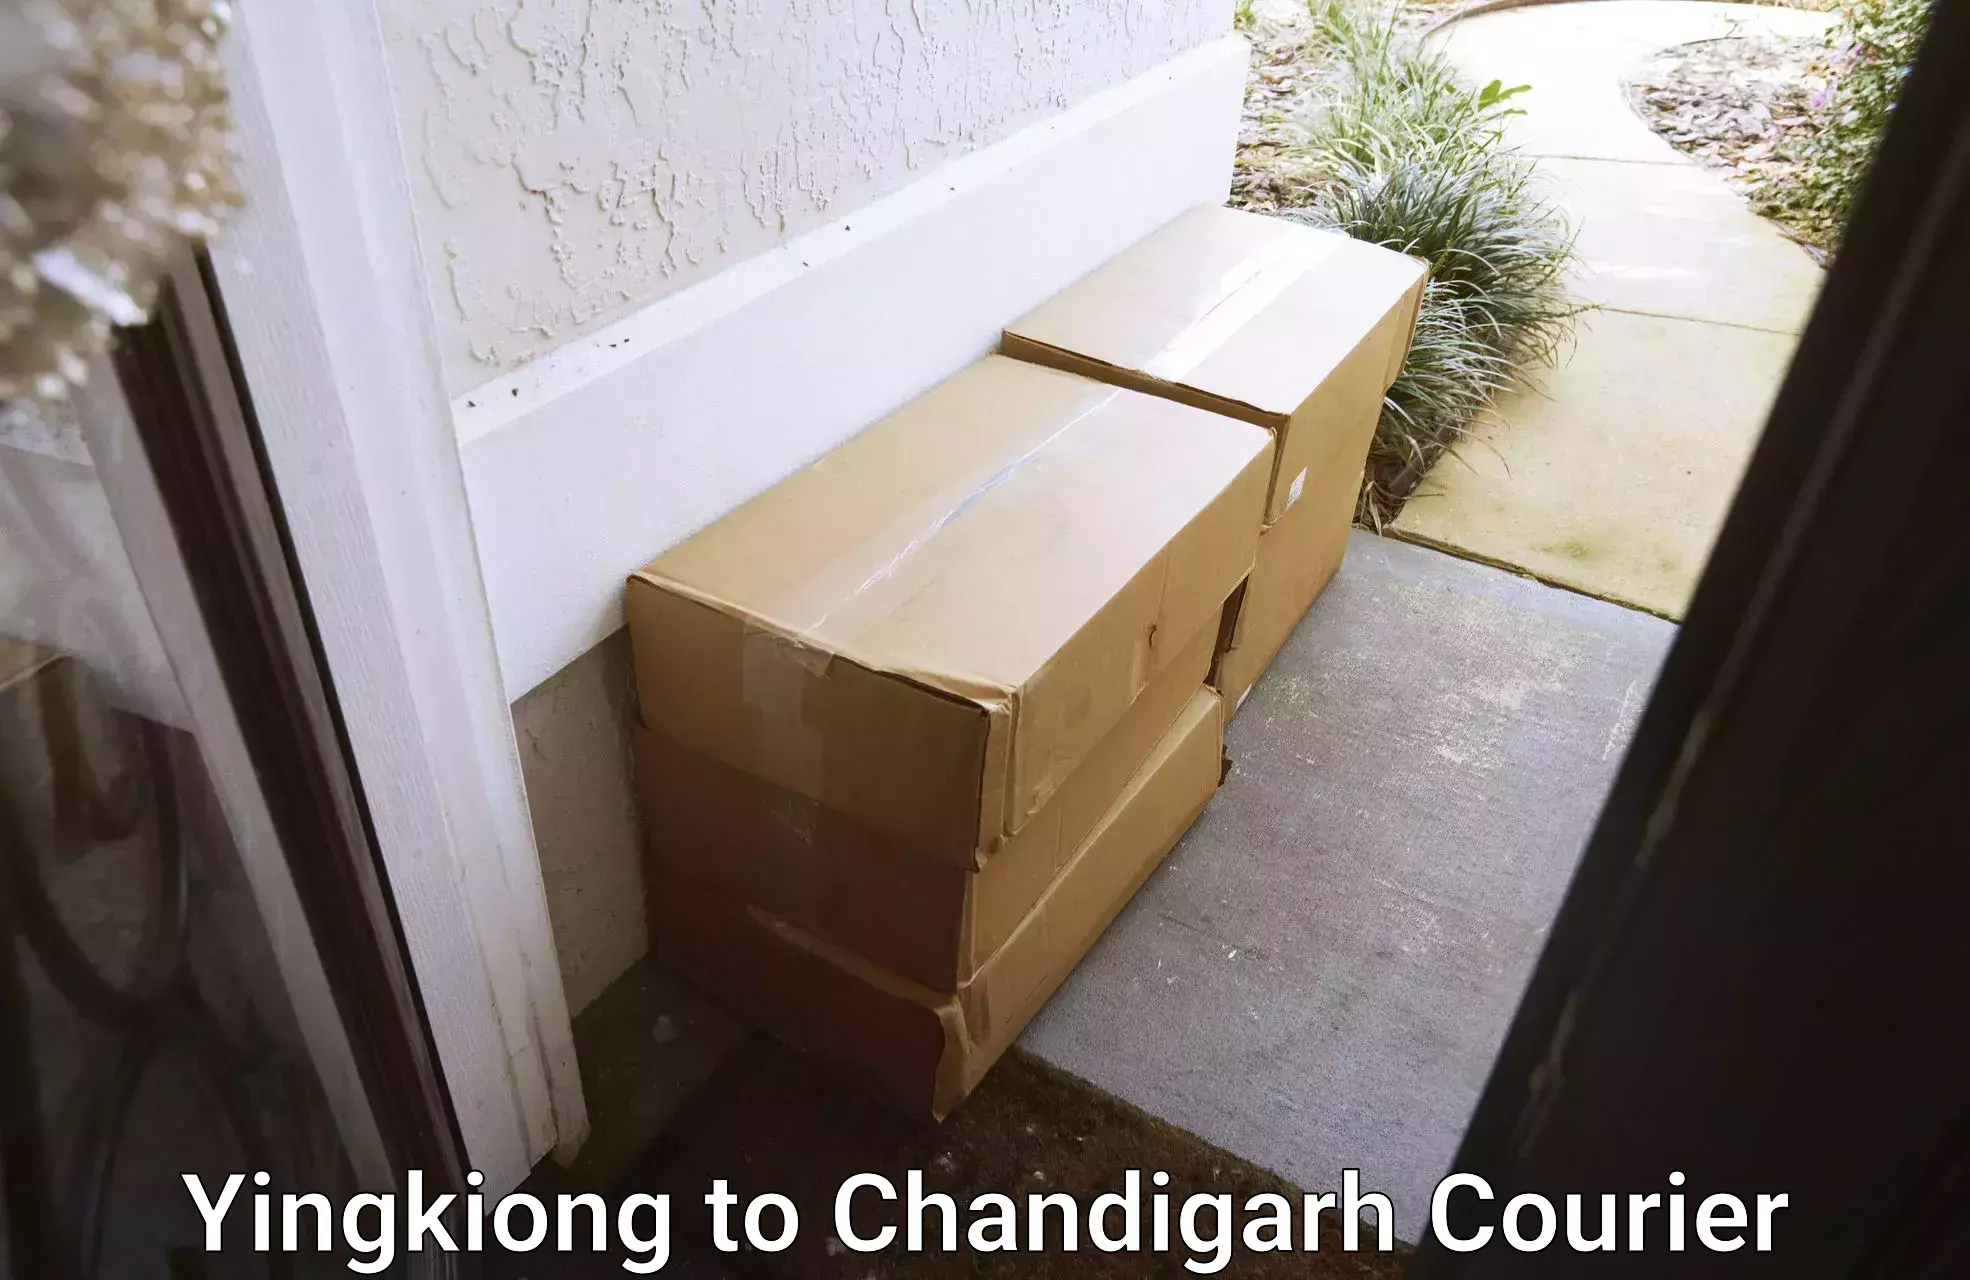 24/7 courier service Yingkiong to Chandigarh